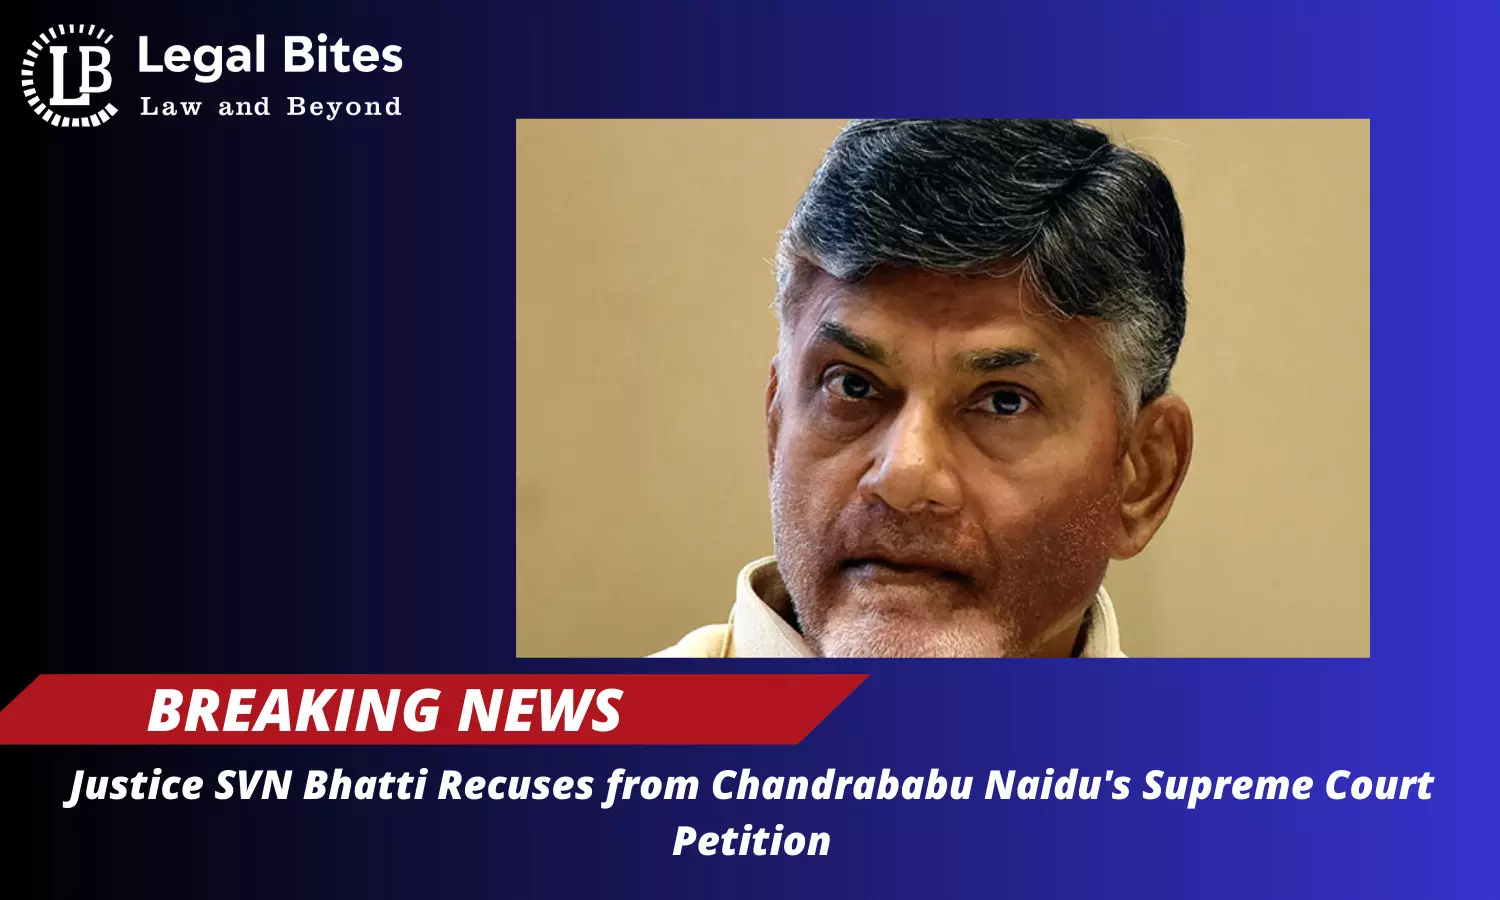 Justice SVN Bhatti Recuses from Chandrababu Naidus Supreme Court Petition